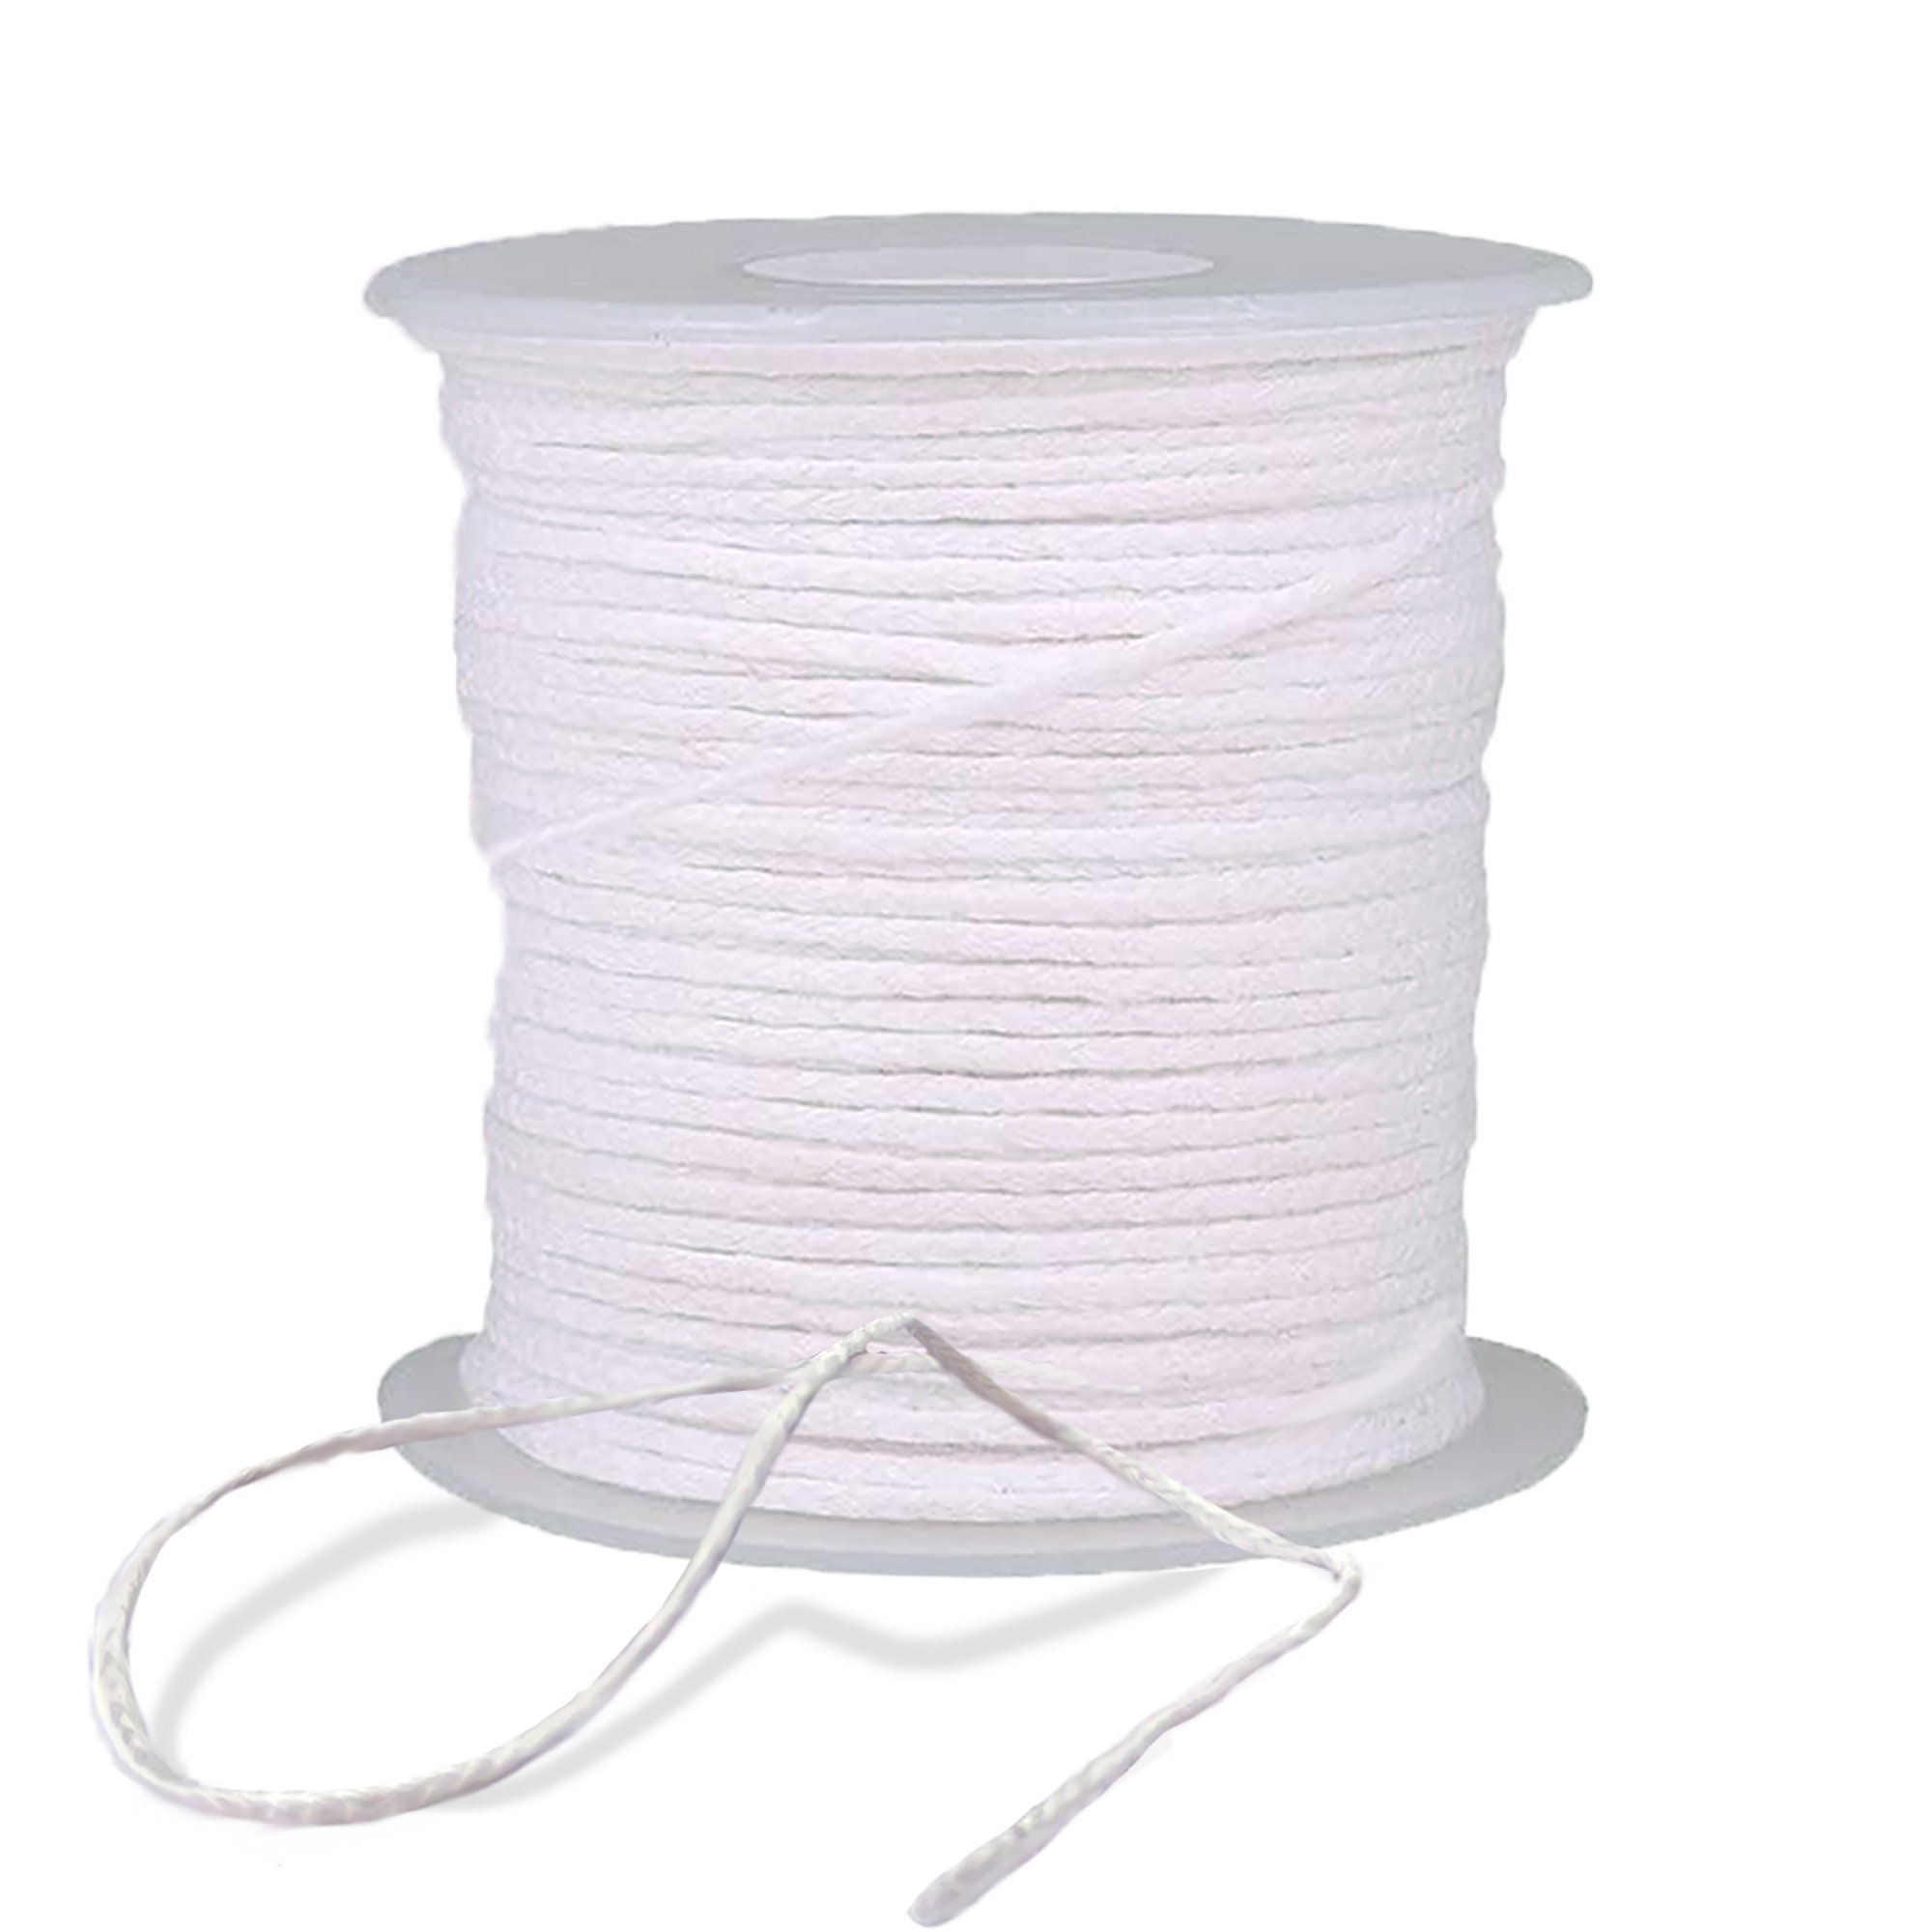 2 rolls candle wick spool candle core Cotton Candle Wick of Cotton Core  Wicks